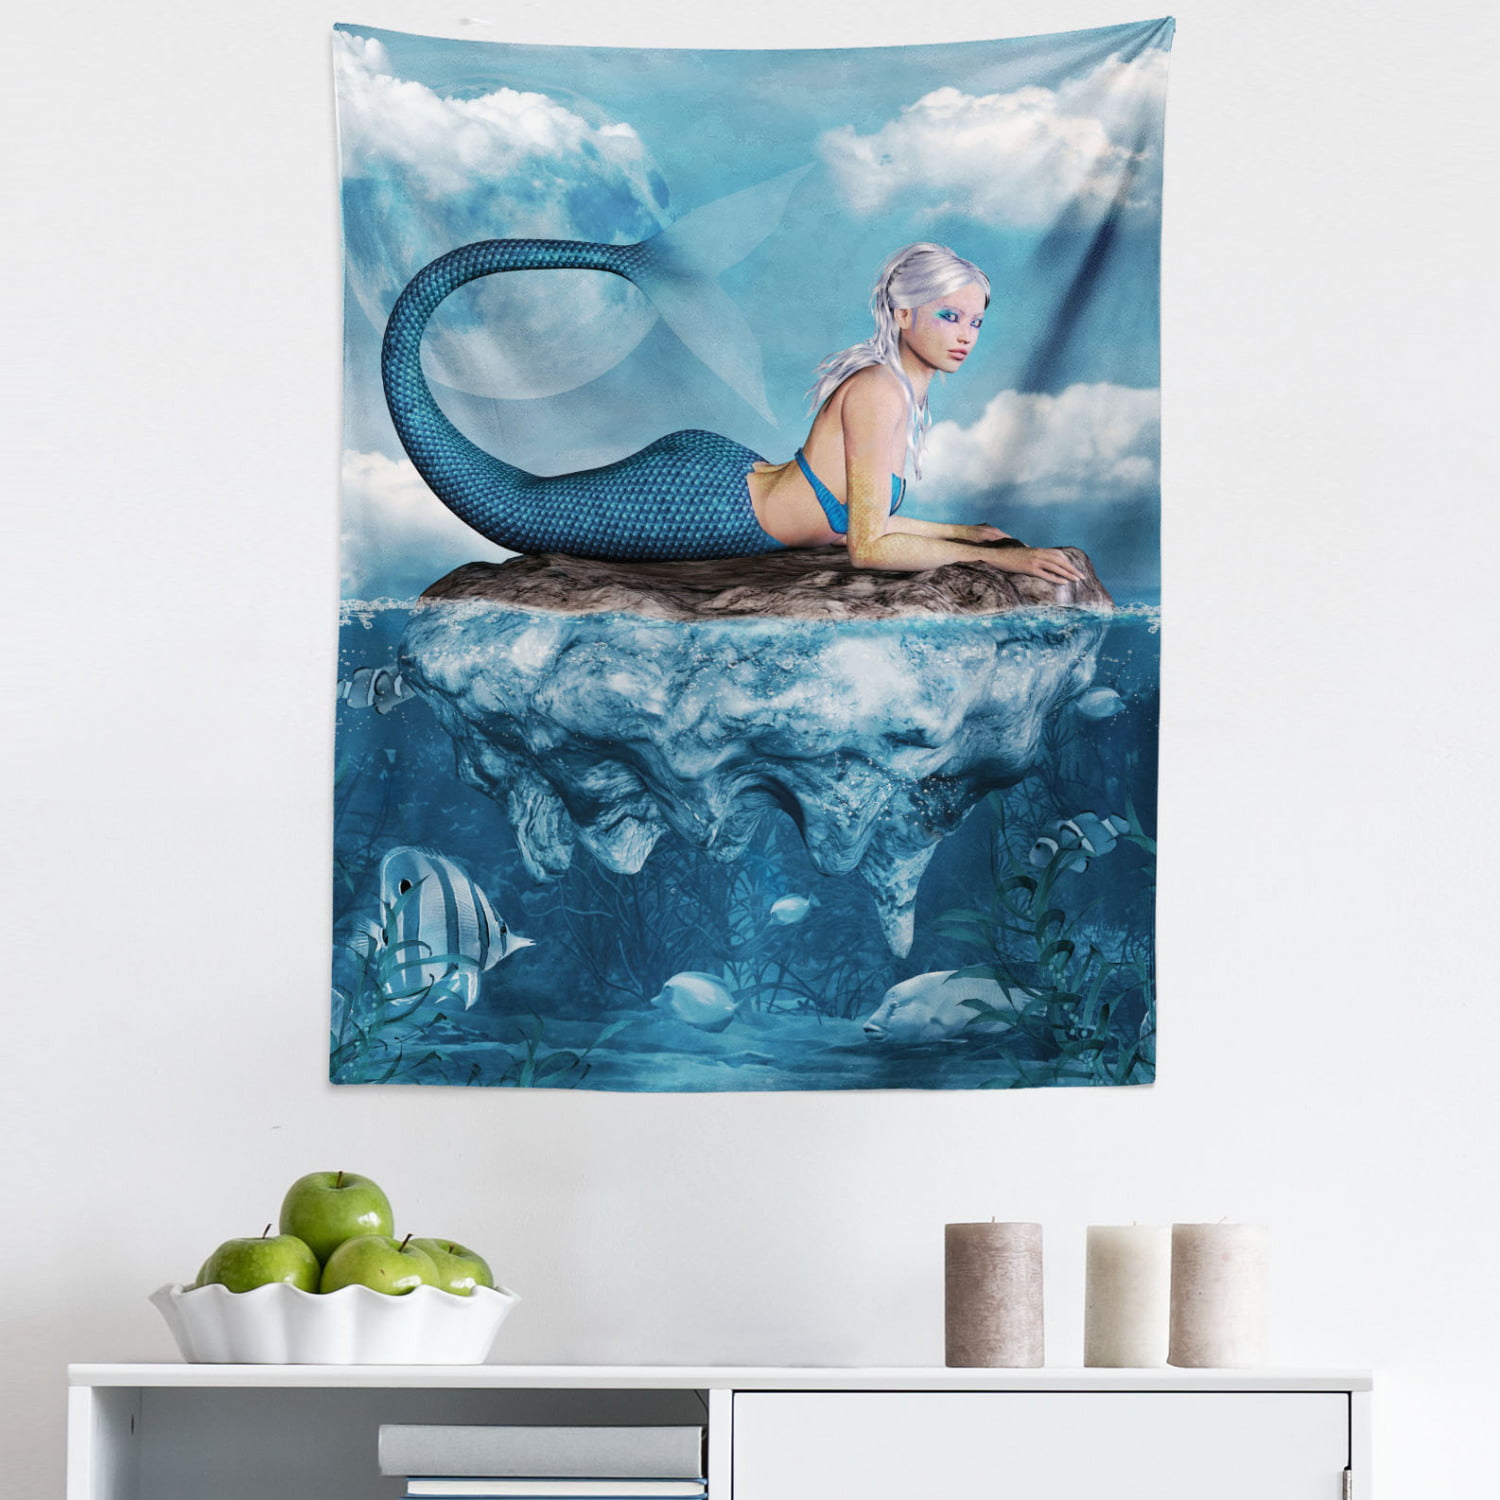 Abstract Mermaid Tapestry Wall Hanging Decor for Bedroom Living Room Dorm 